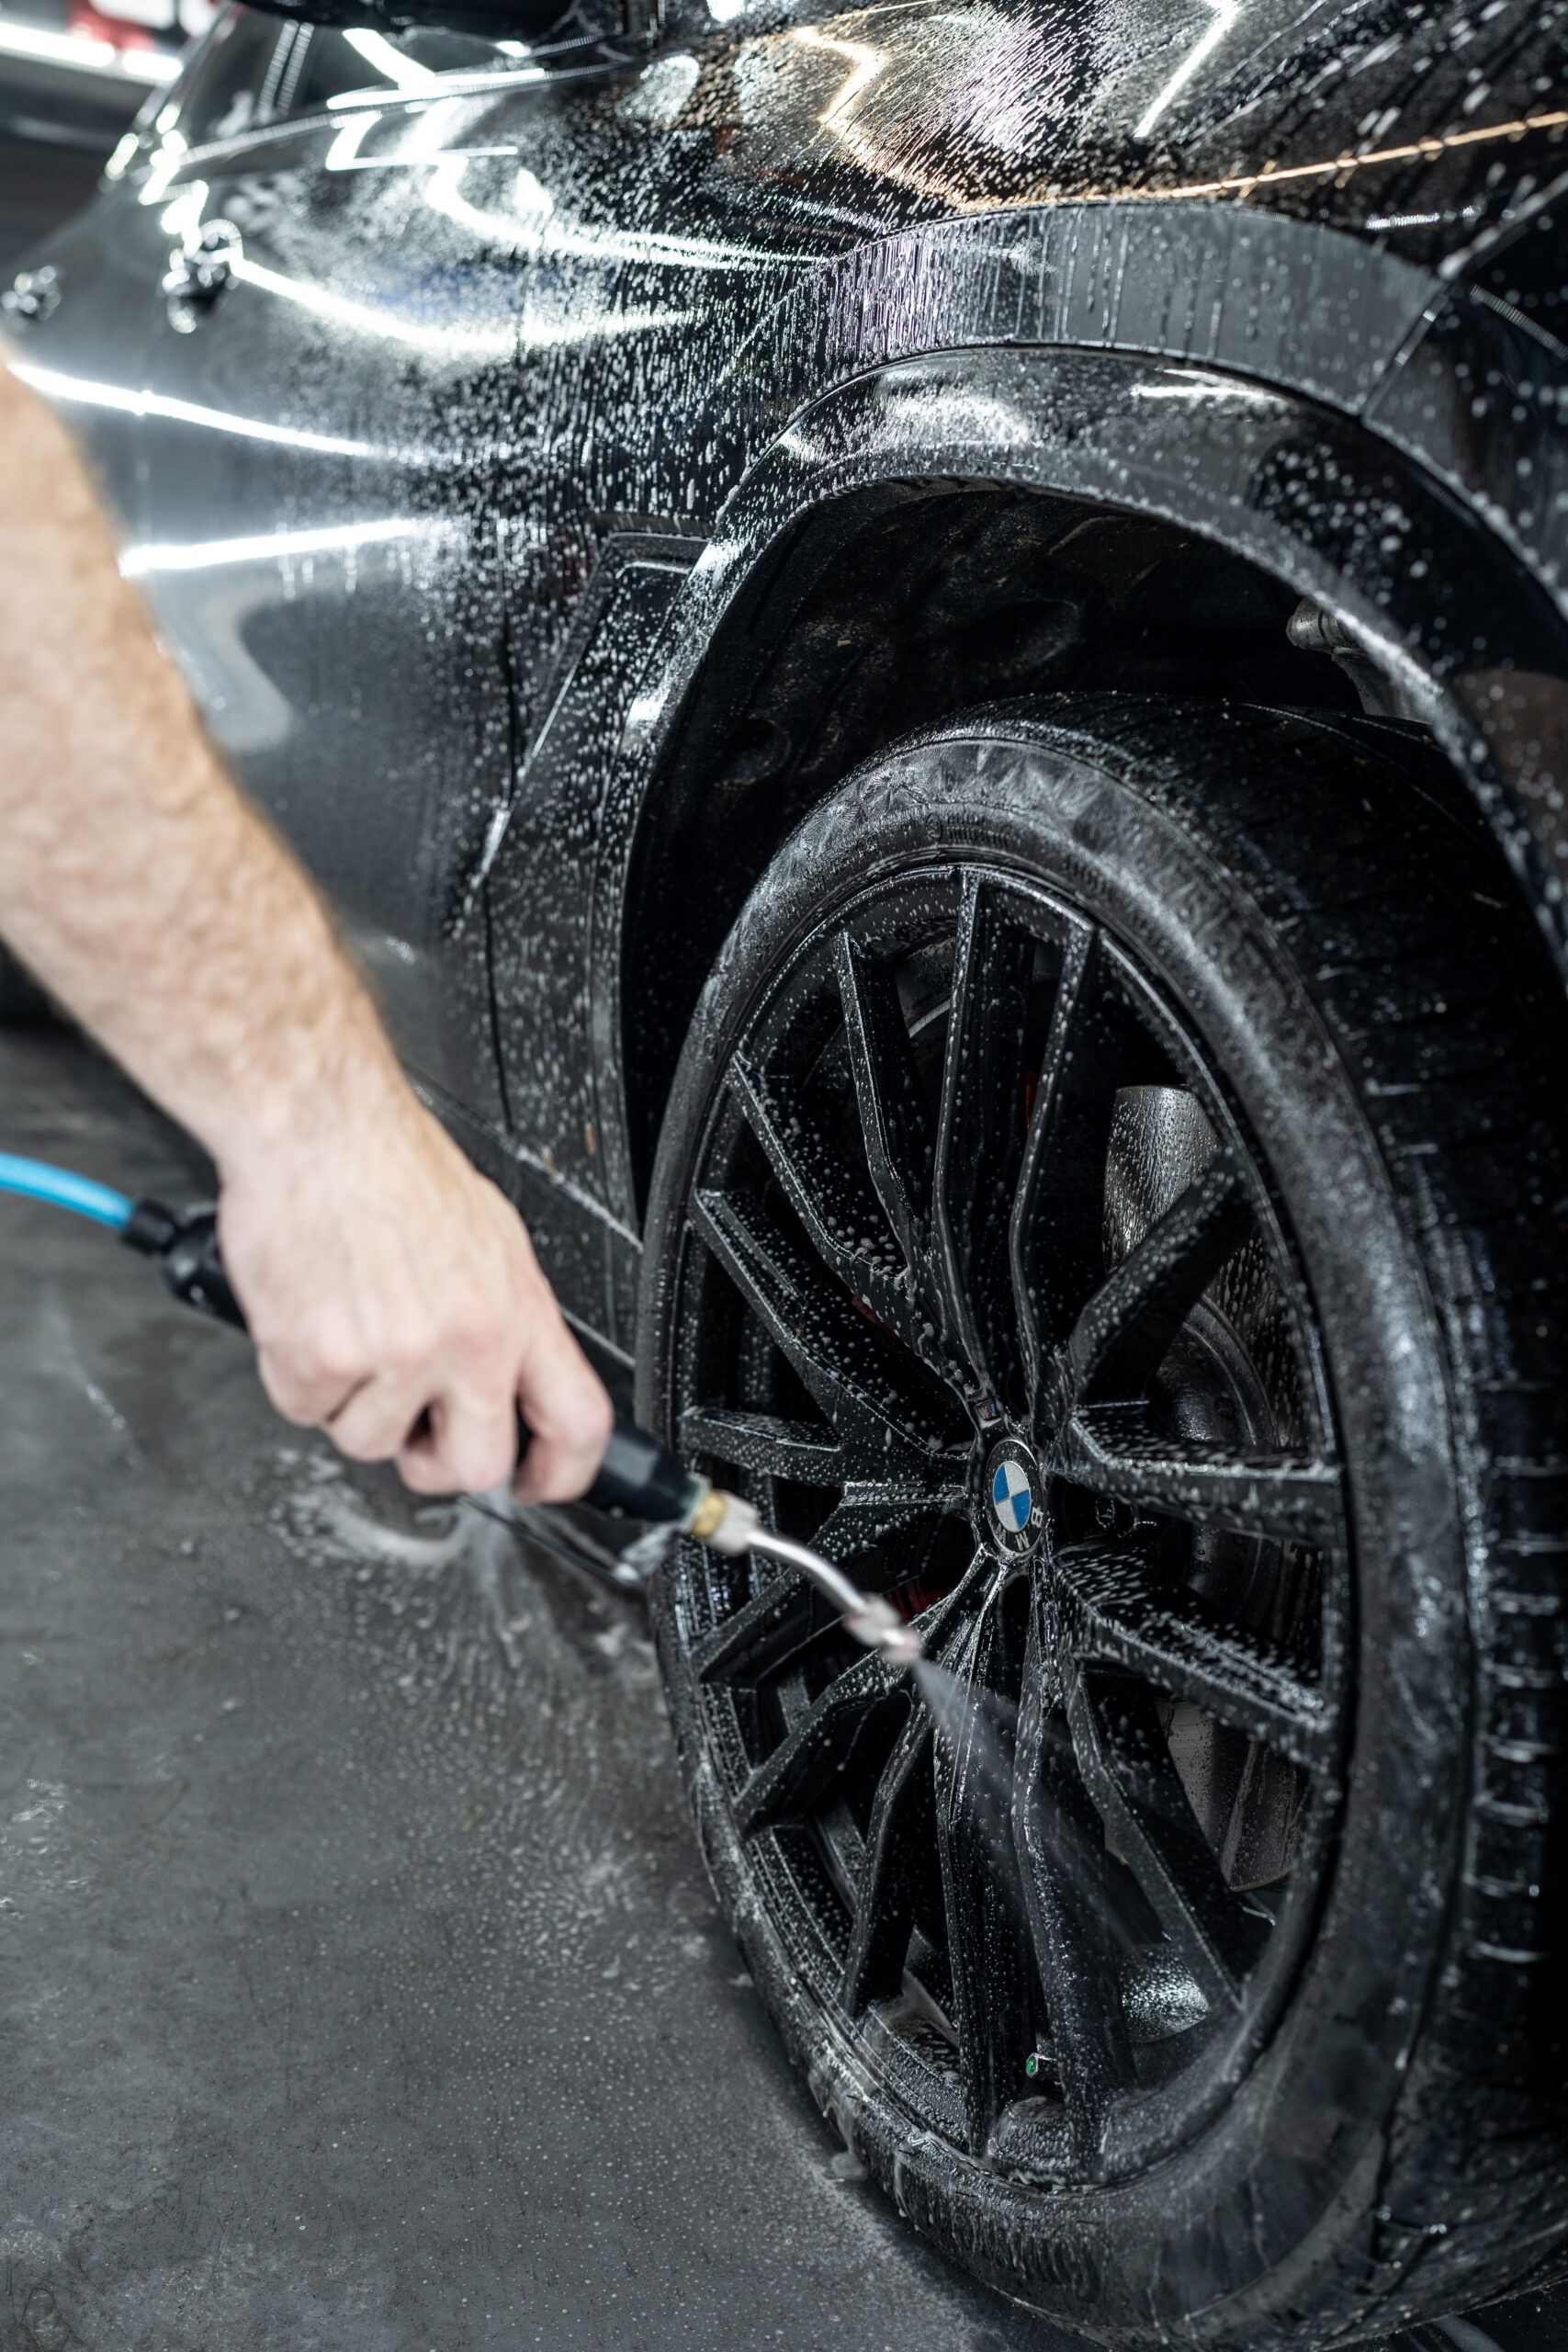 A person is washing a car wheel with a brush.